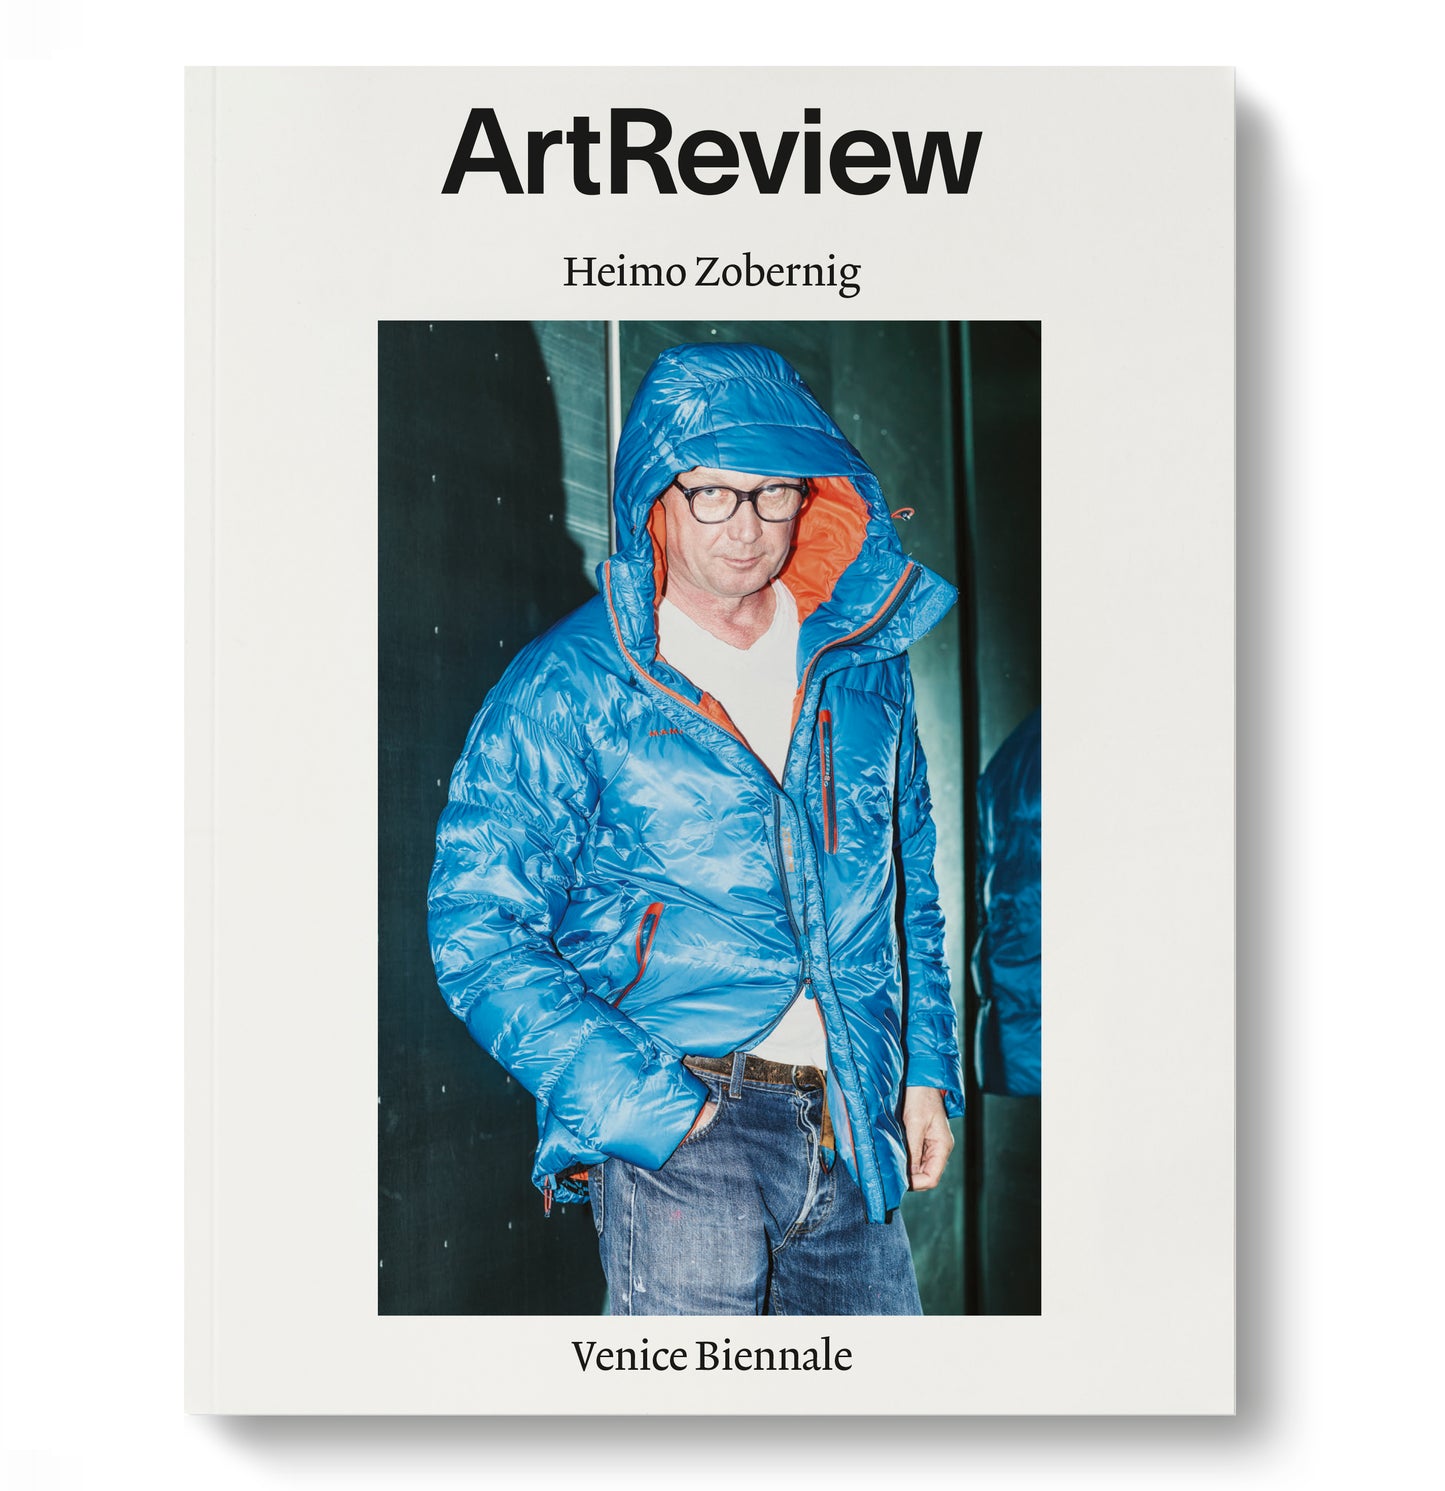 ArtReview May 2015